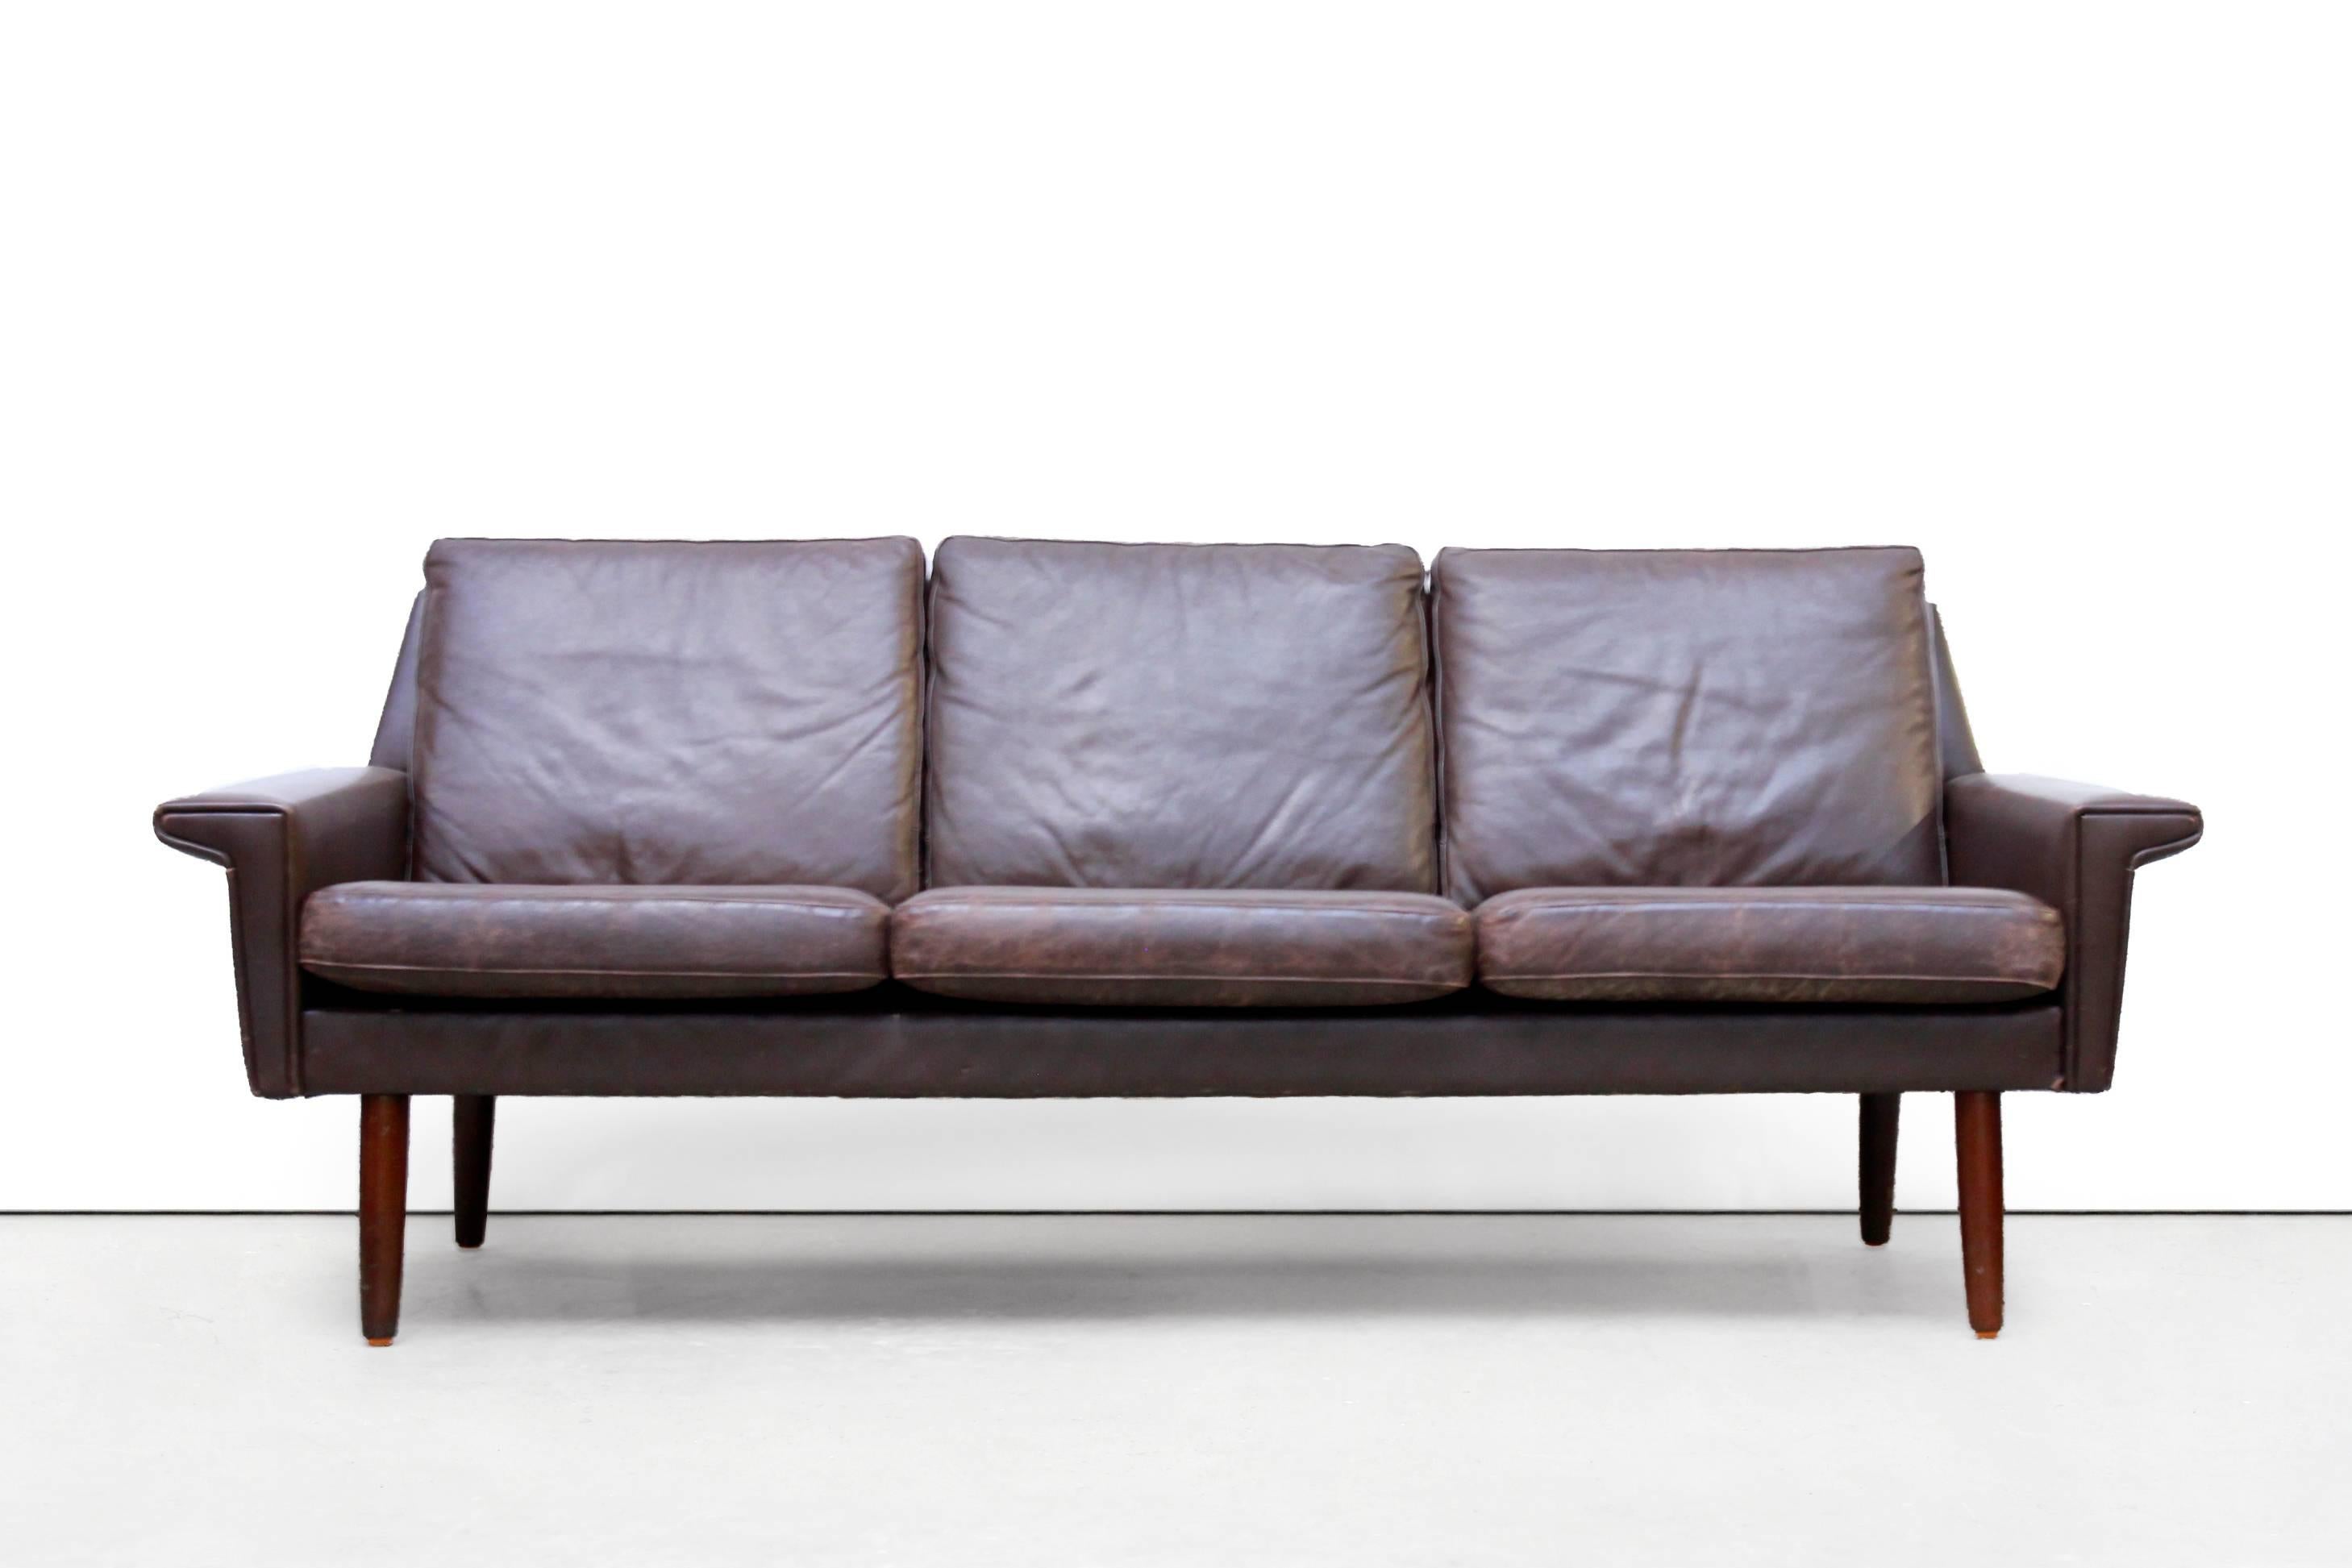 Classic Mid-Century design three-seat cushion sofa in brown patinated leather.
This three-seat sofa is made in the Vejen Polstermobelfabrik in Denmark and has teak tapered legs.